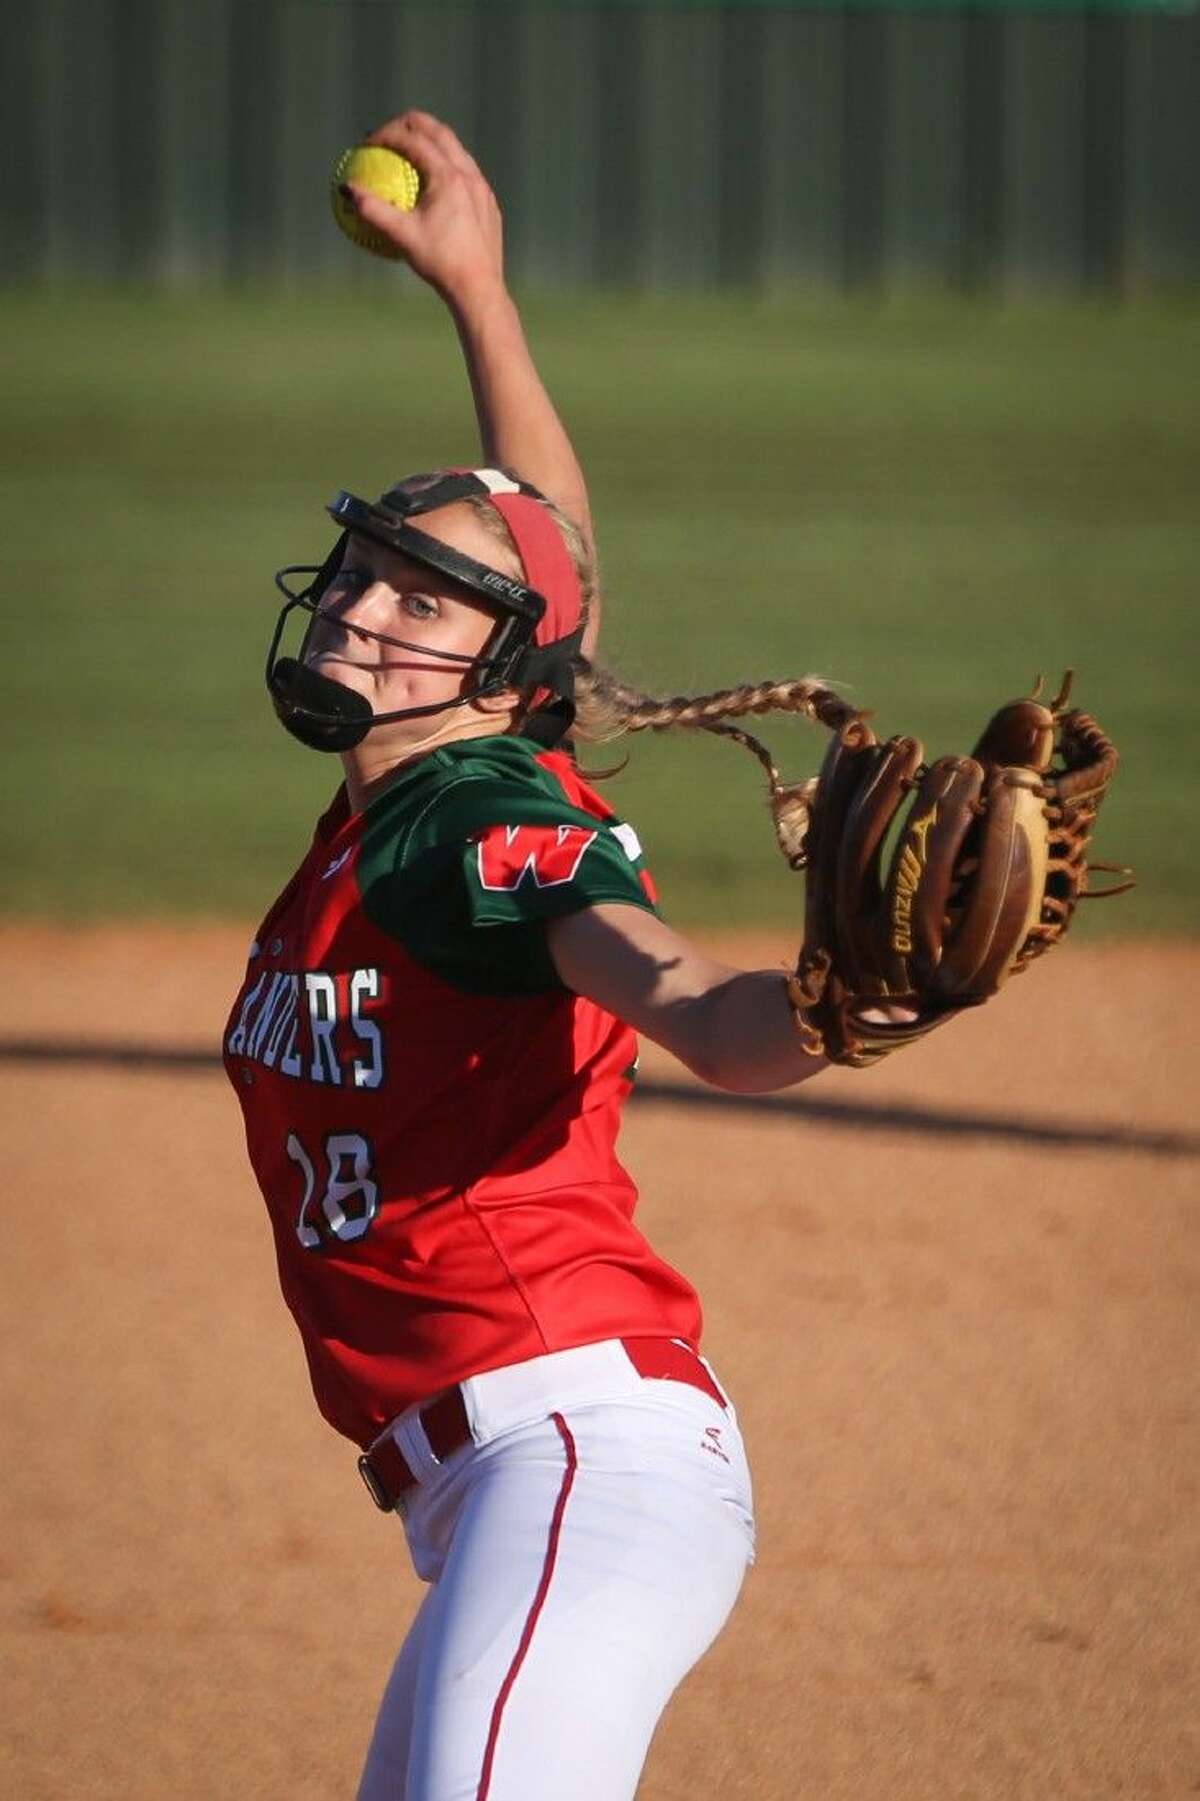 The Woodlands’ Emily Langkamp (18) throws a pitch on Friday at The Woodlands High School. To view more photos from the game, go to HCNPics.com.